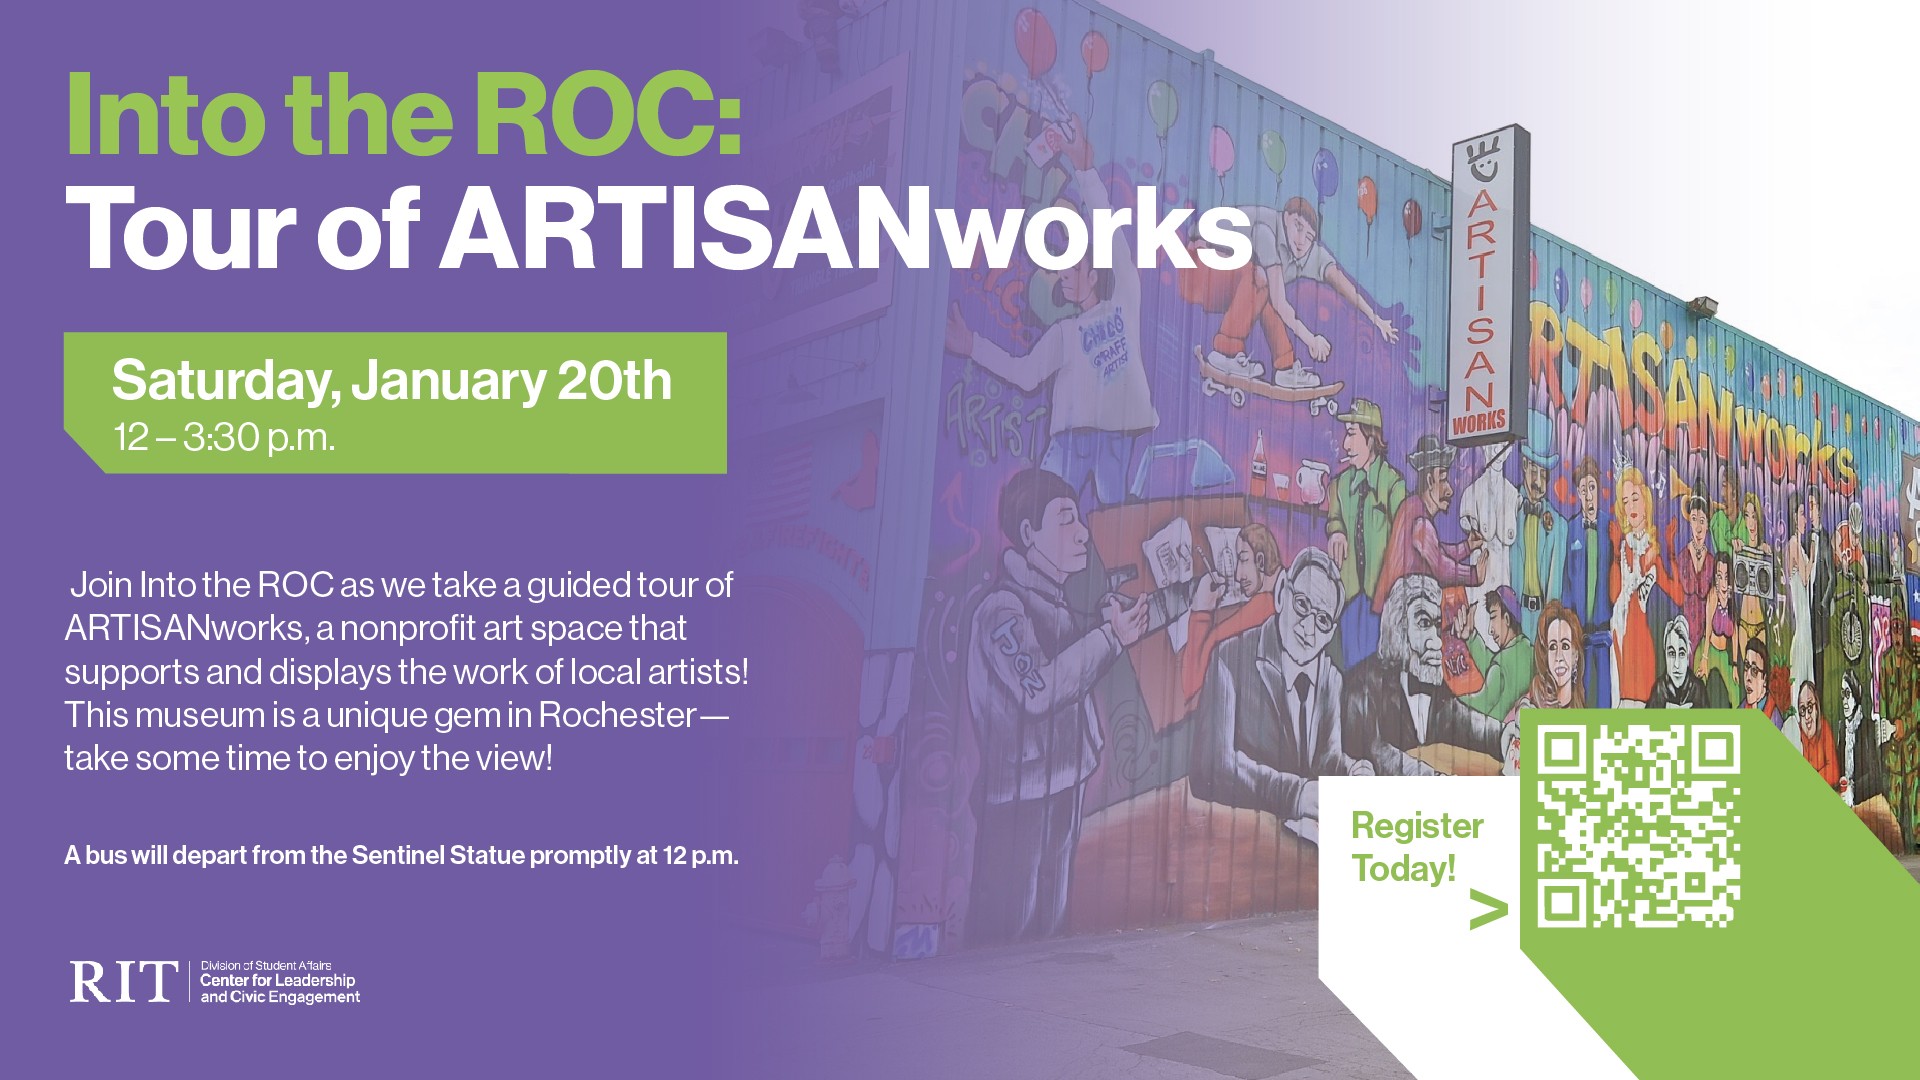 Green and white text on a purple gradient with a painted collage on the side of the ARTISANworks building. QR to register is located in the lower right corner.